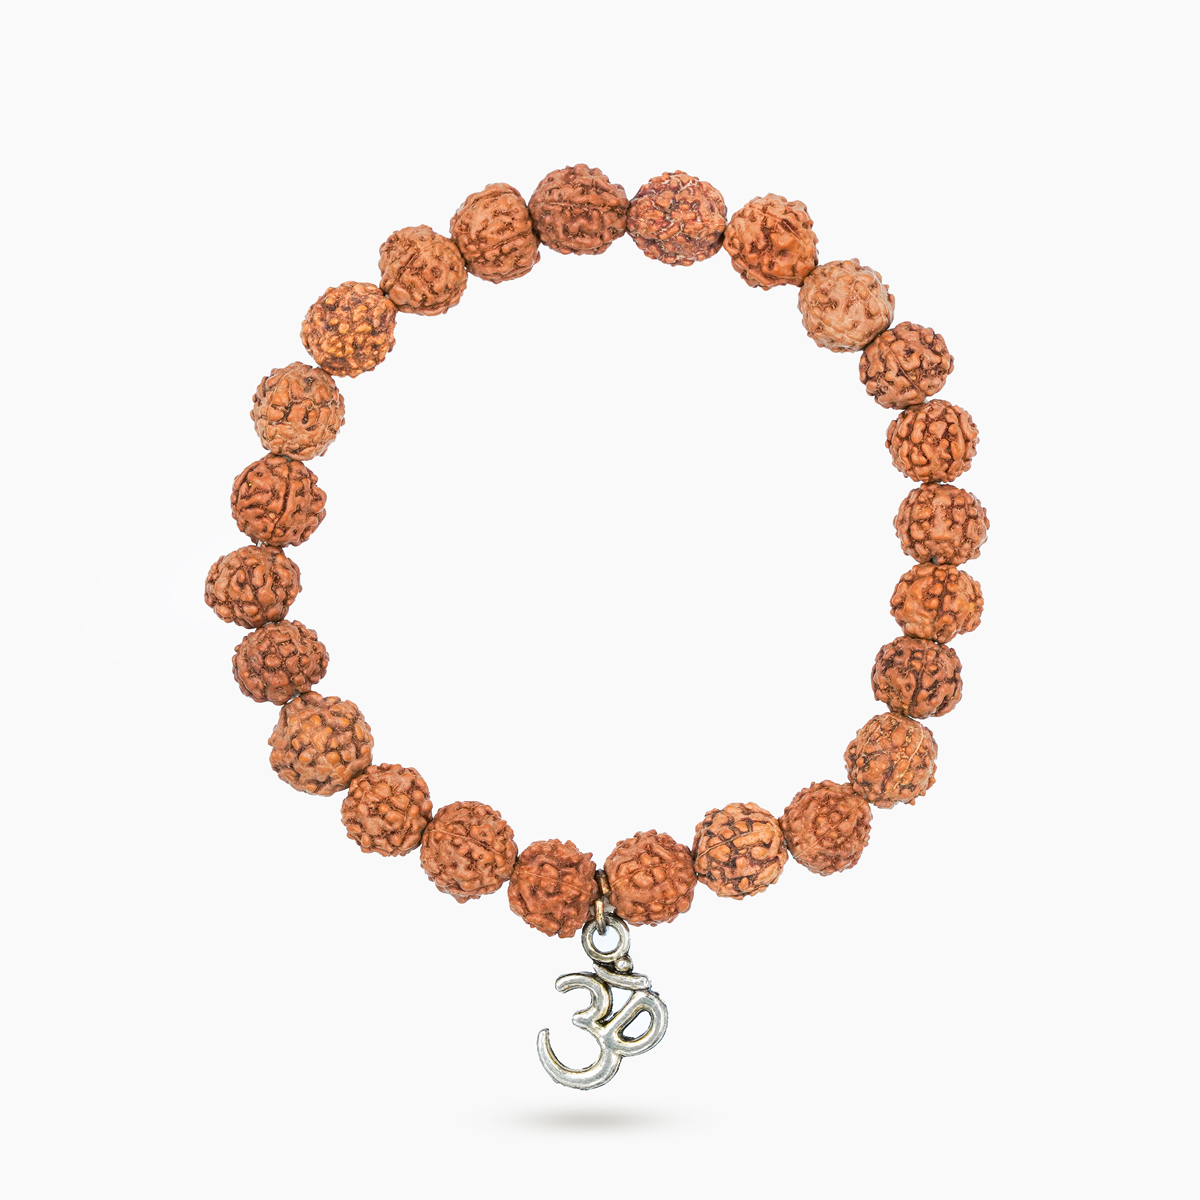 Buy Distance Bracelets Rudraksha Stone of Lava, for Couple Men and Women,  Lava Stone Natural Gemstone 6 Mm, Handmade Natural Pearls Online in India -  Etsy